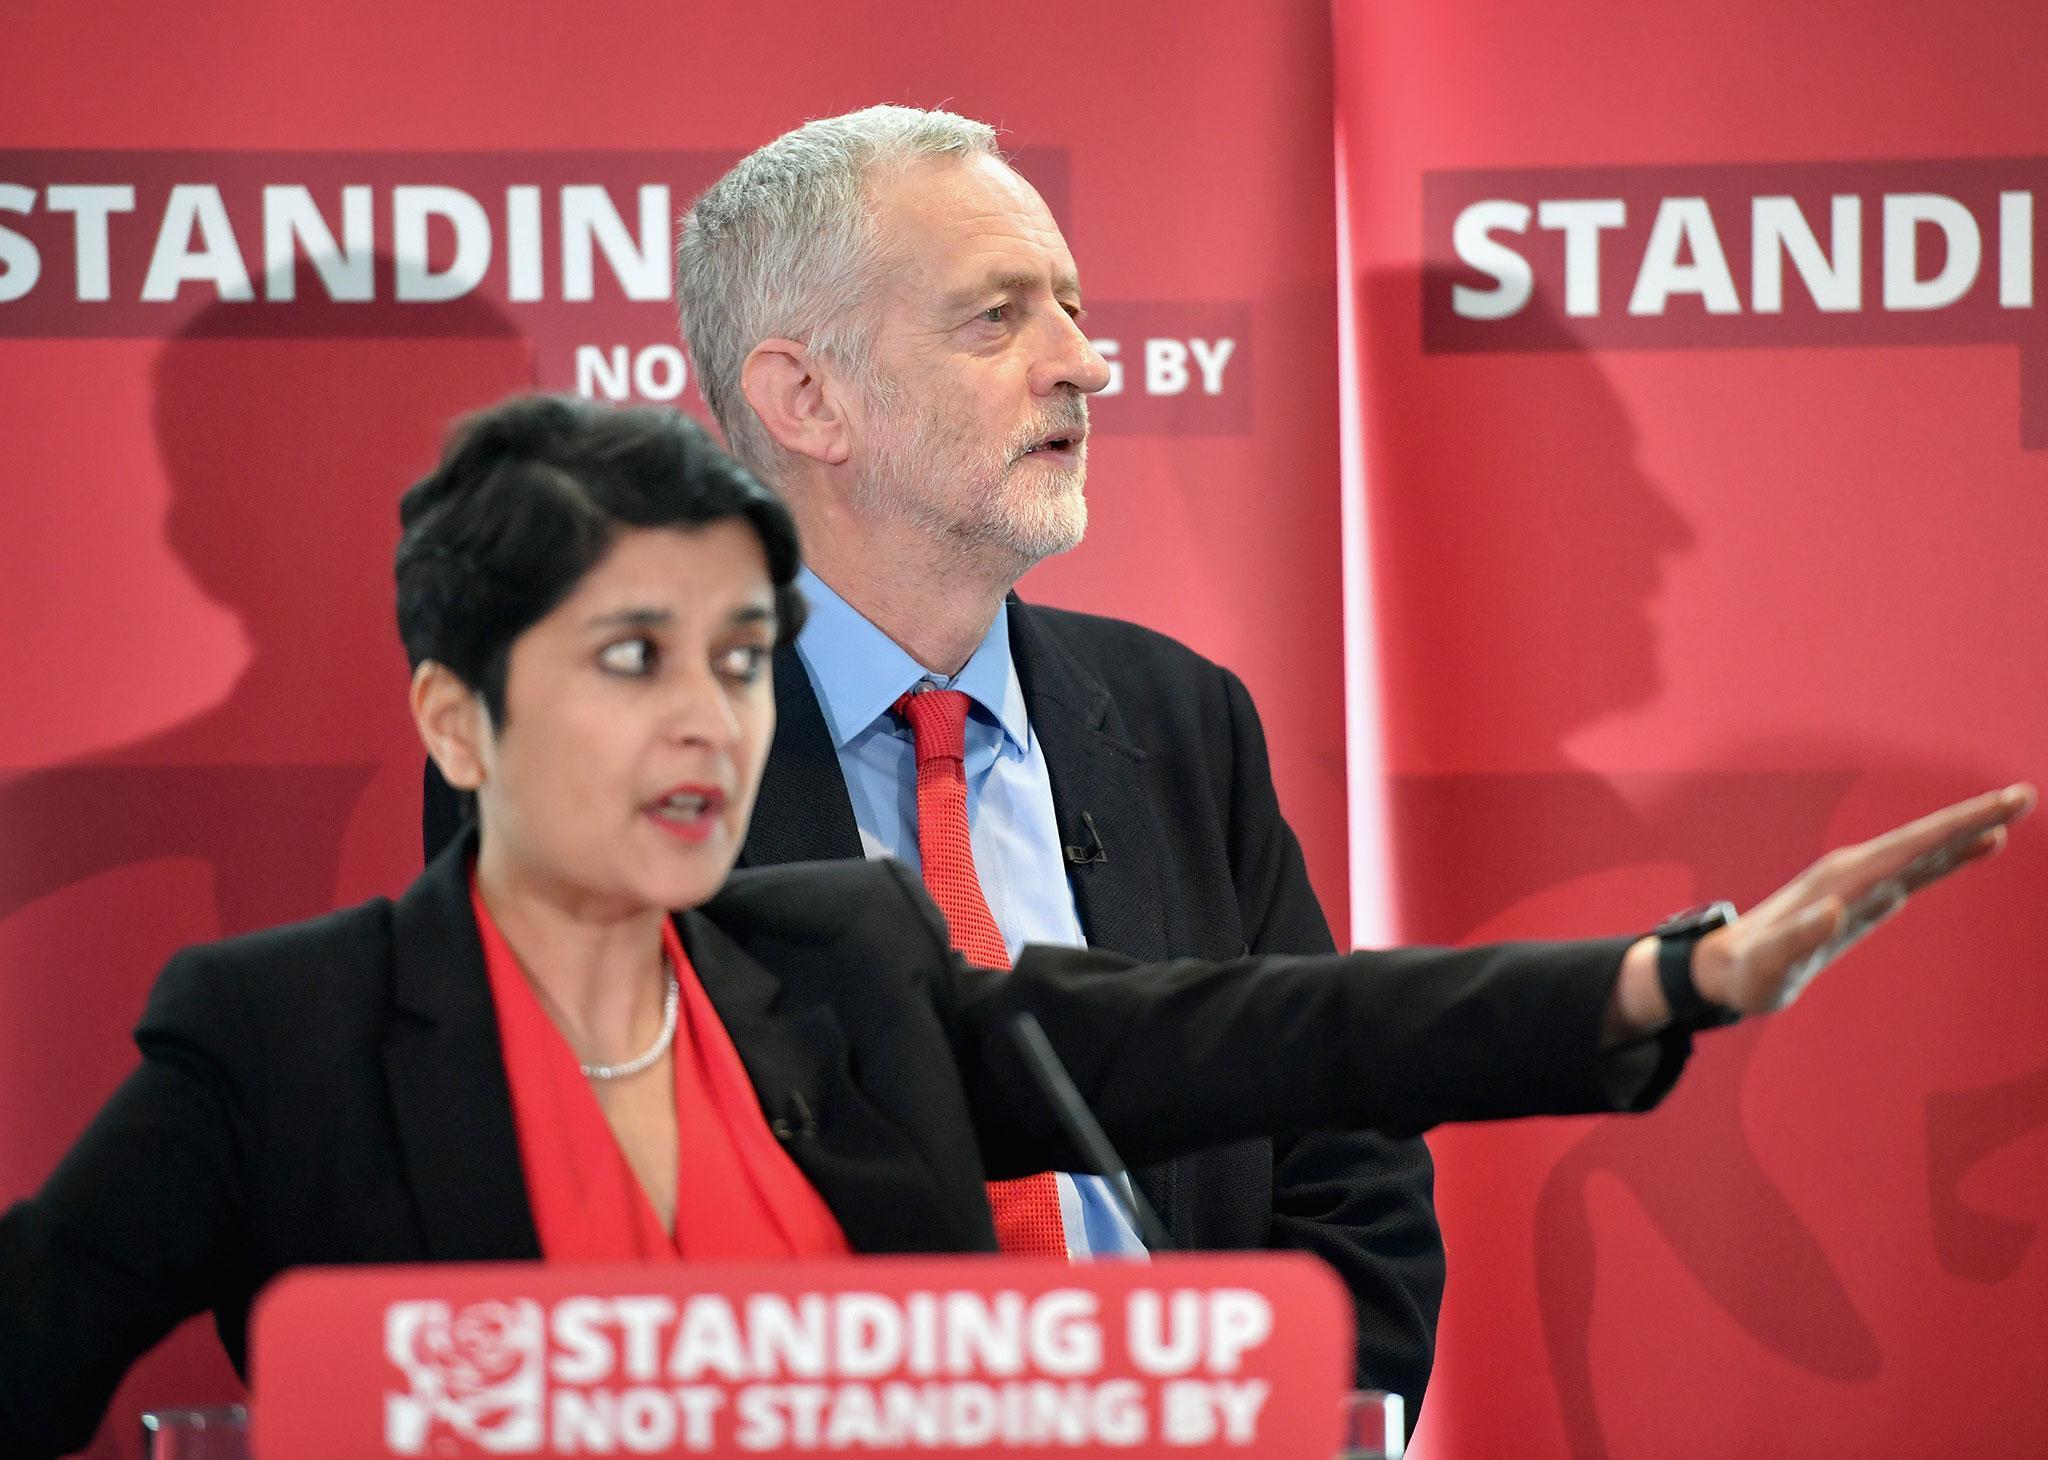 Shami Chakrabarti joins the shadow Cabinet for the first time